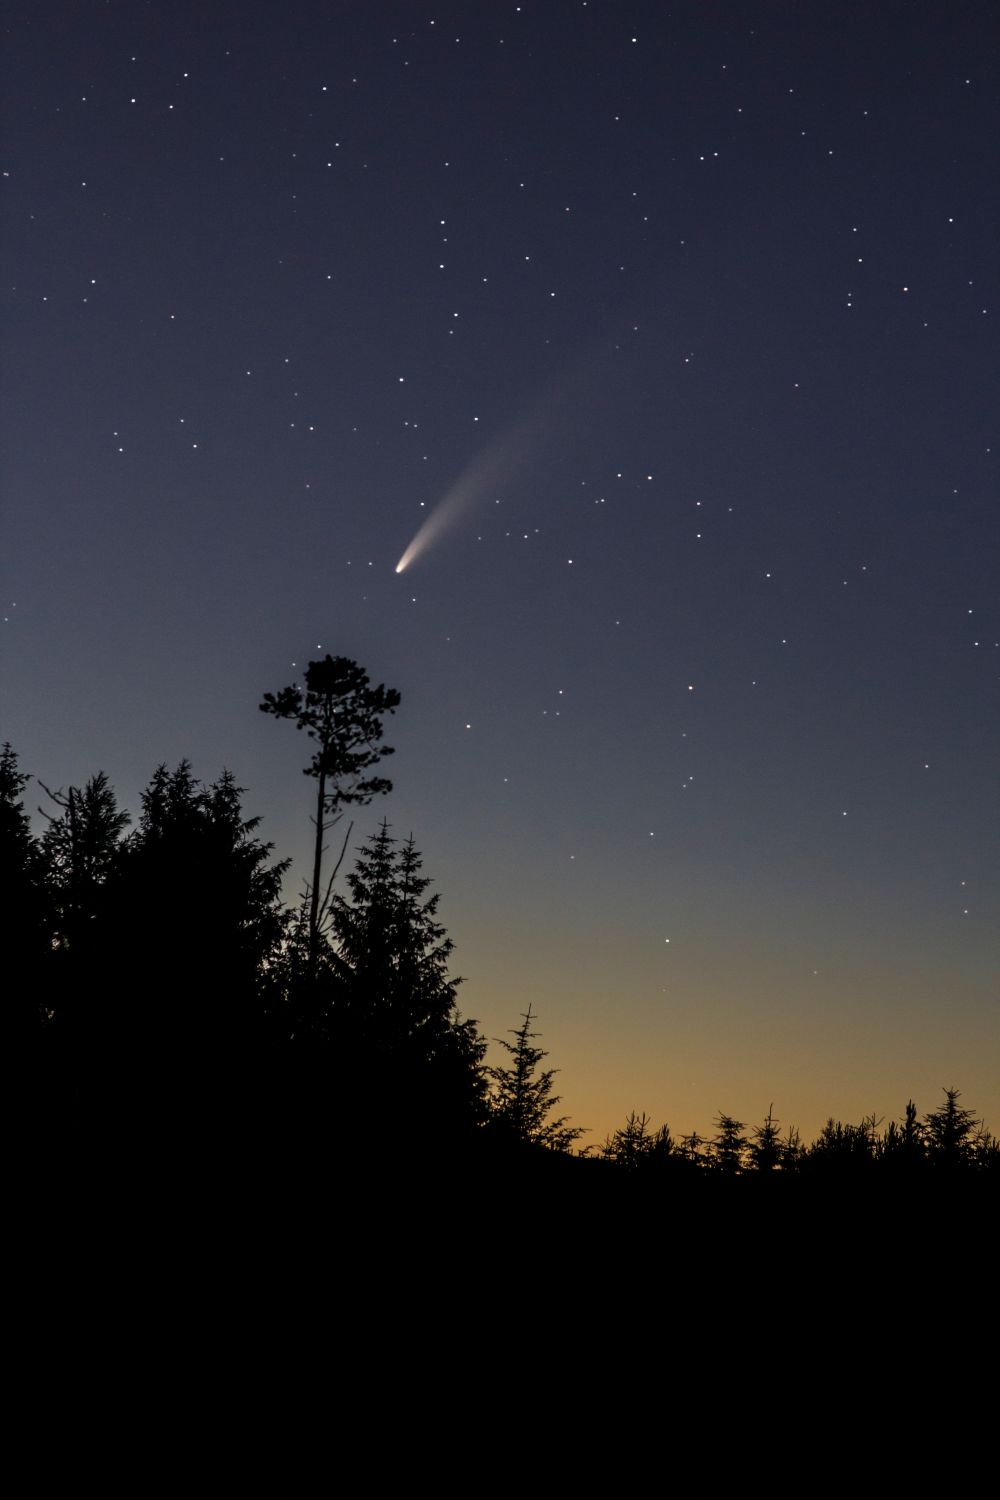 COMET C/2020 F3 NEOWISE over Macclesfield Forest